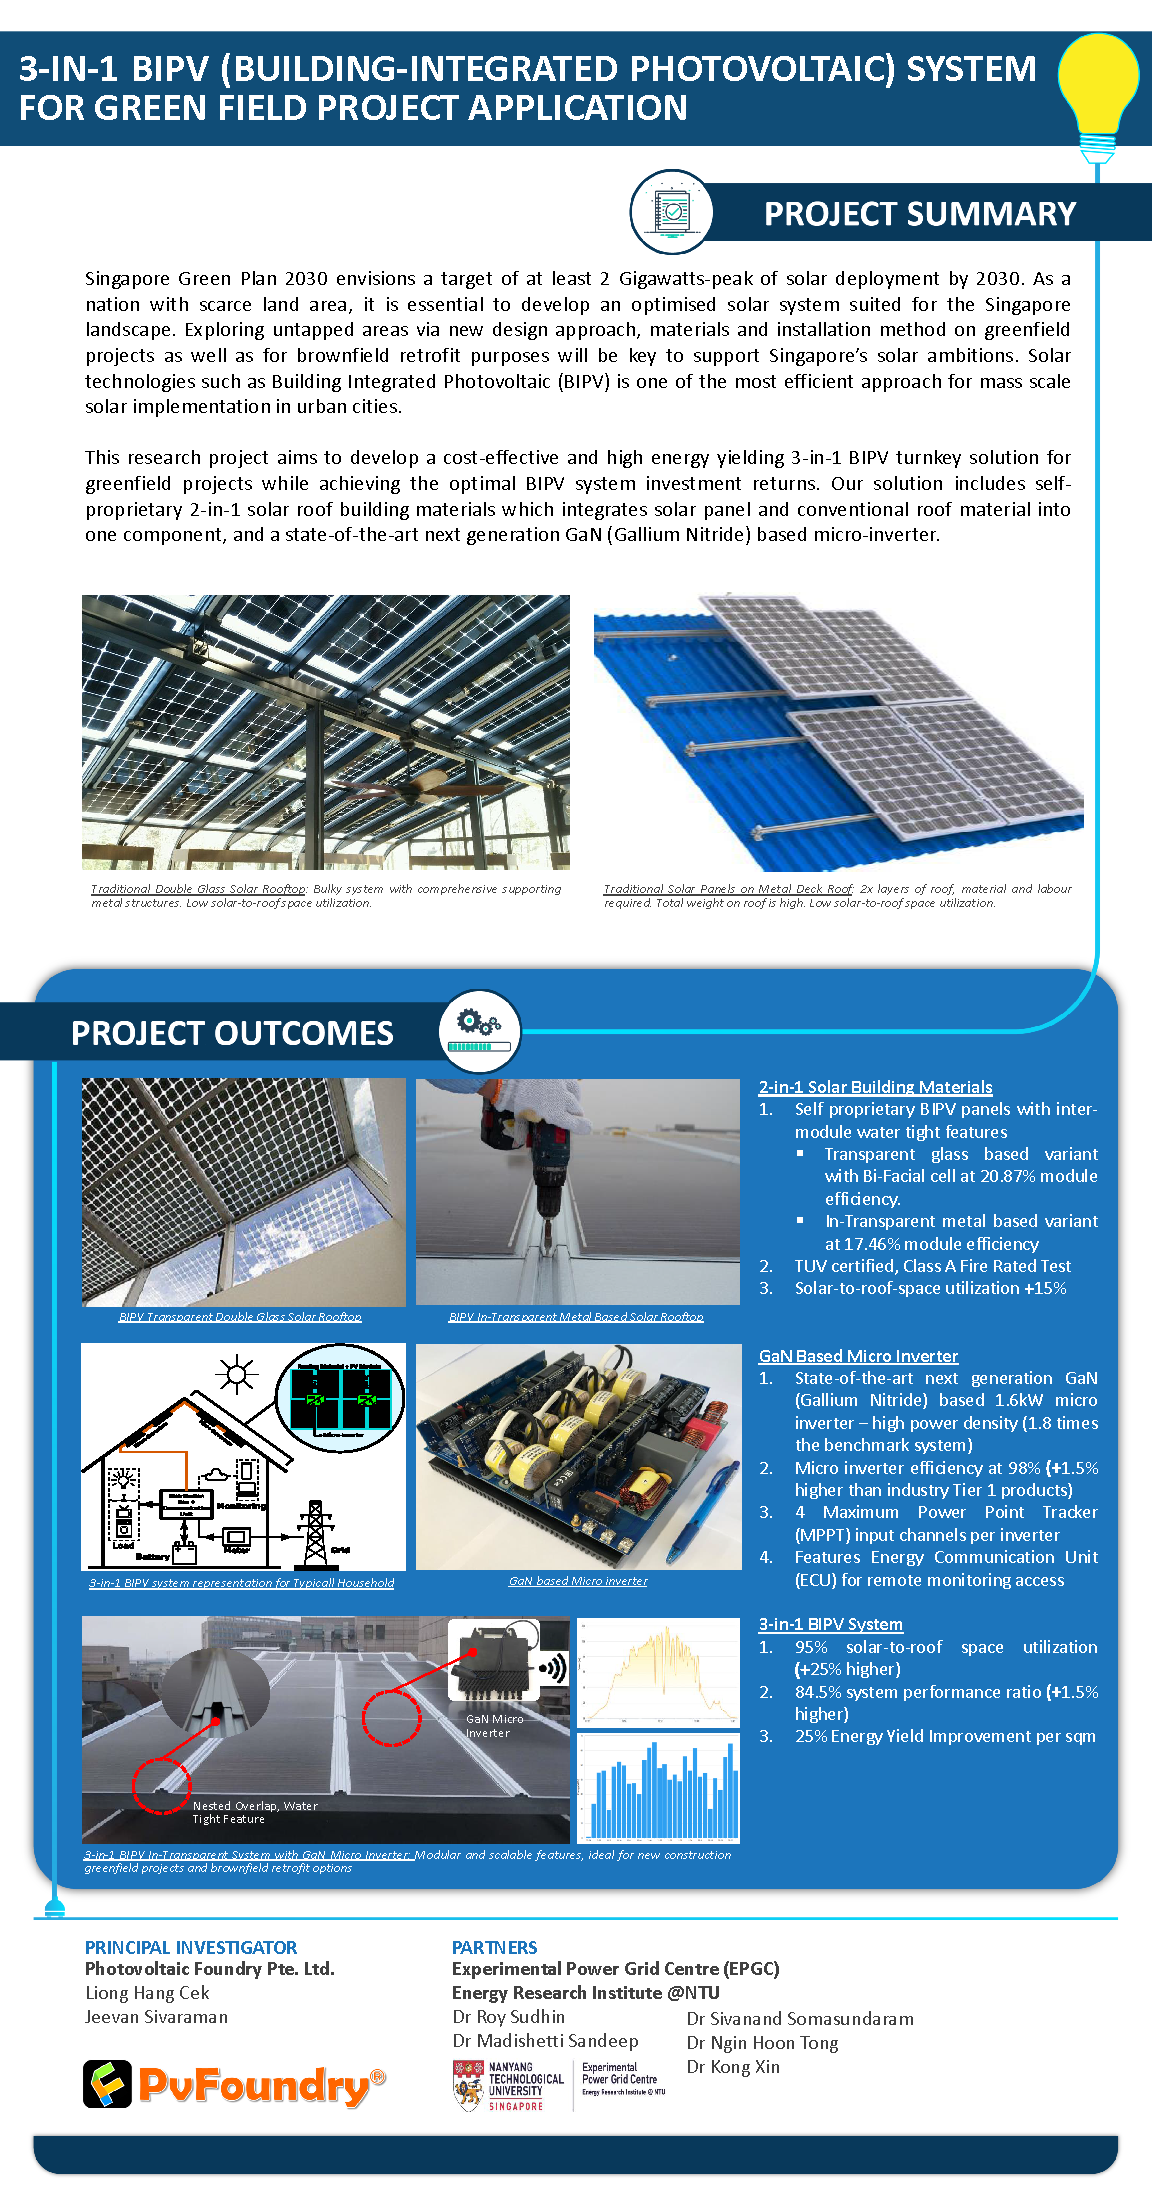 3-in-1 BIPV (Building-Integrated Photovoltaic) System for Green Field Project Application